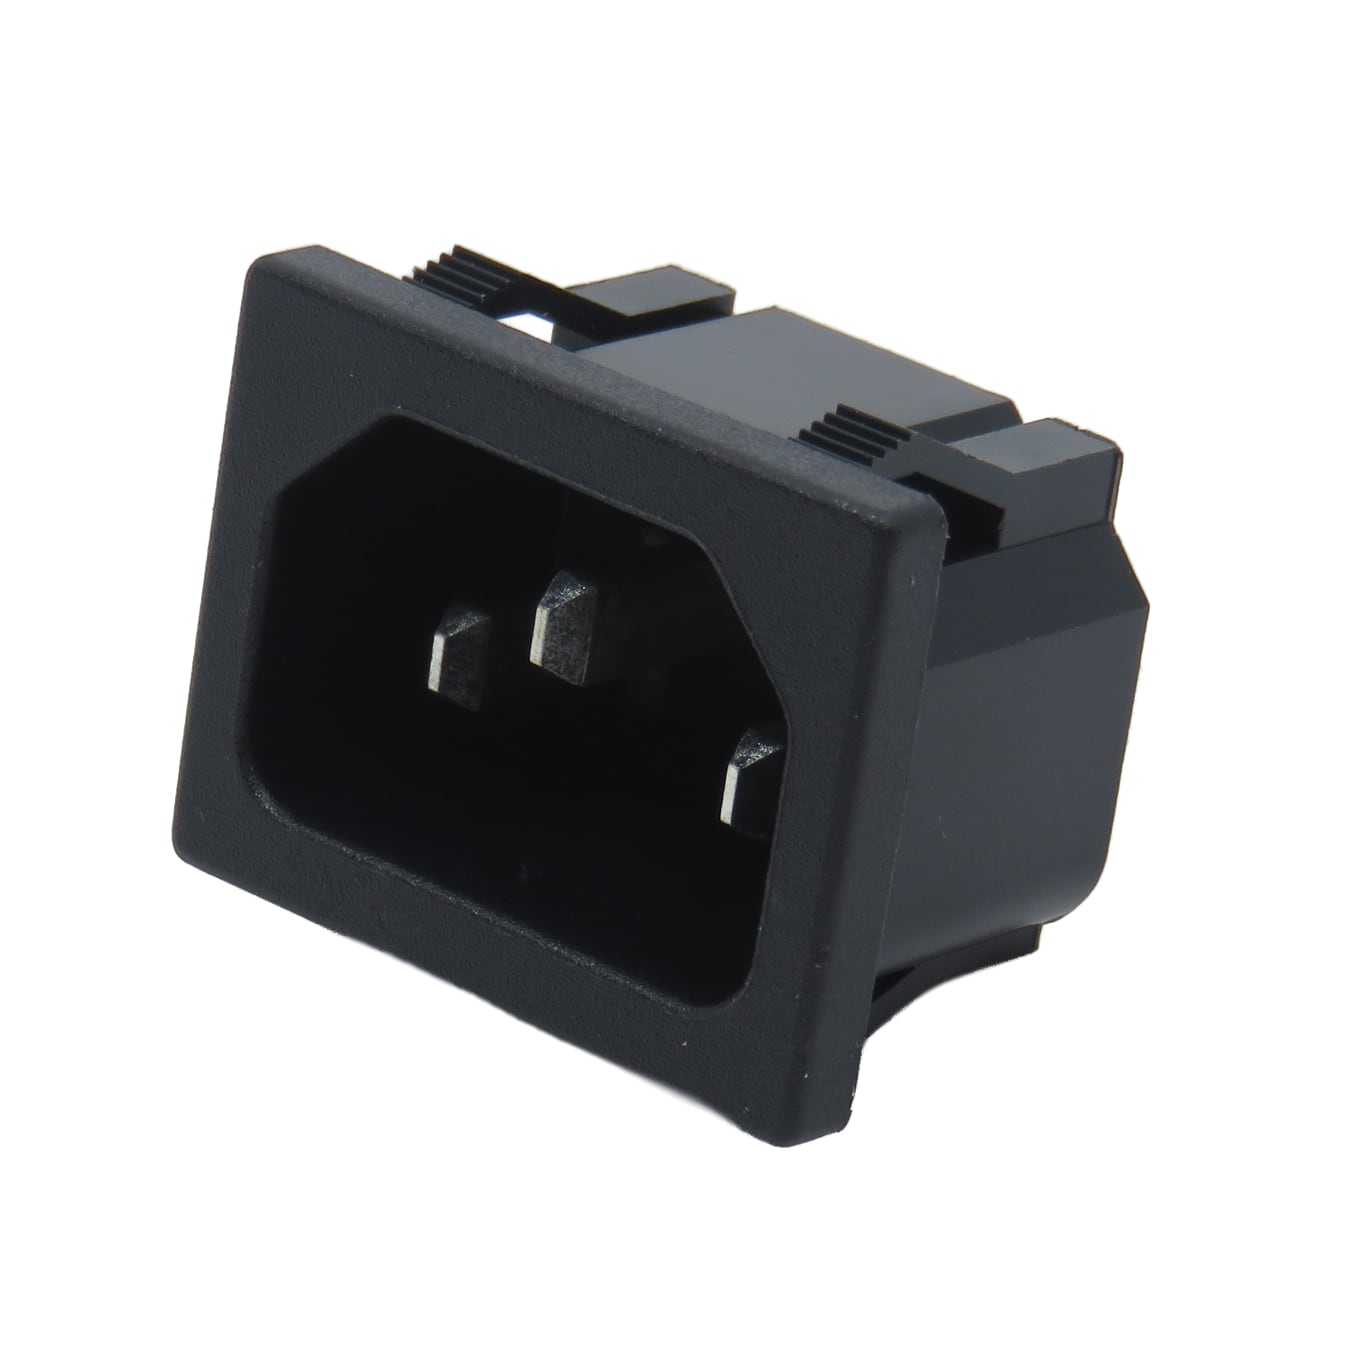 Puqpress Power Entry Connector C14 – (Power Inlet Socket) - 1-110-0015-1